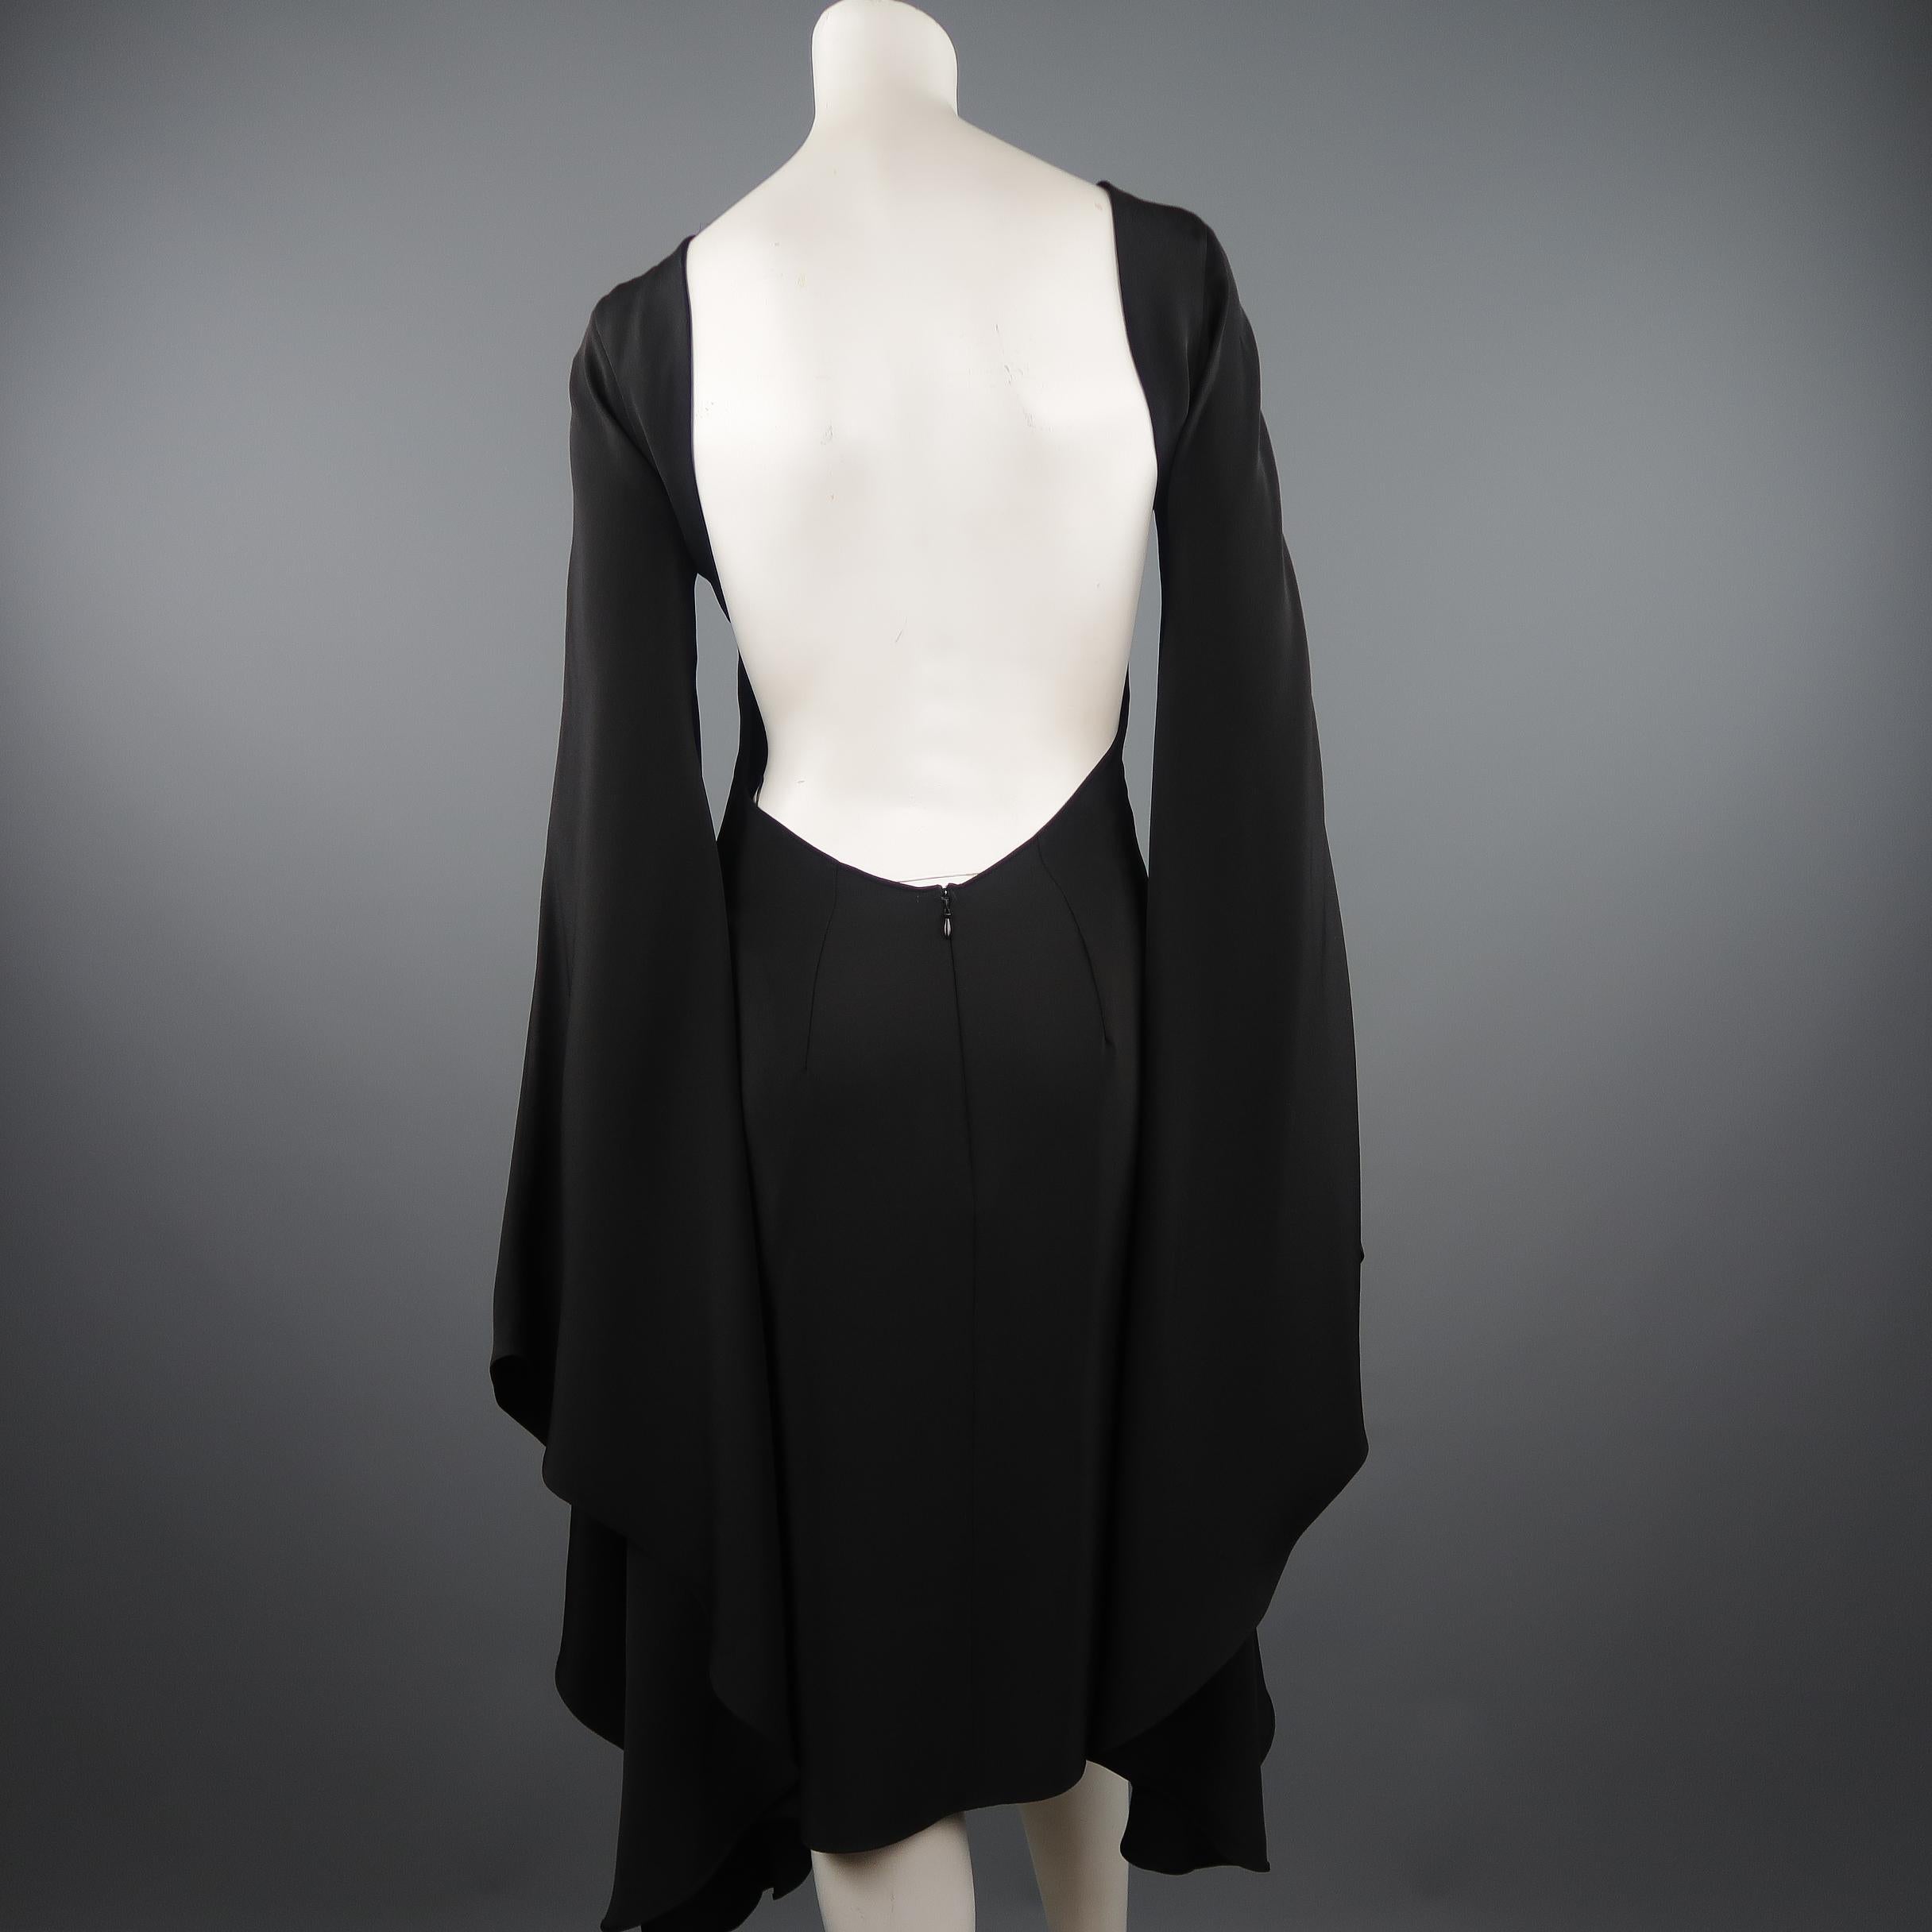 Iconic TOM FORD - Spring 2013 Runway Size 4 Black Silk Open Back Cocktail Dress 4